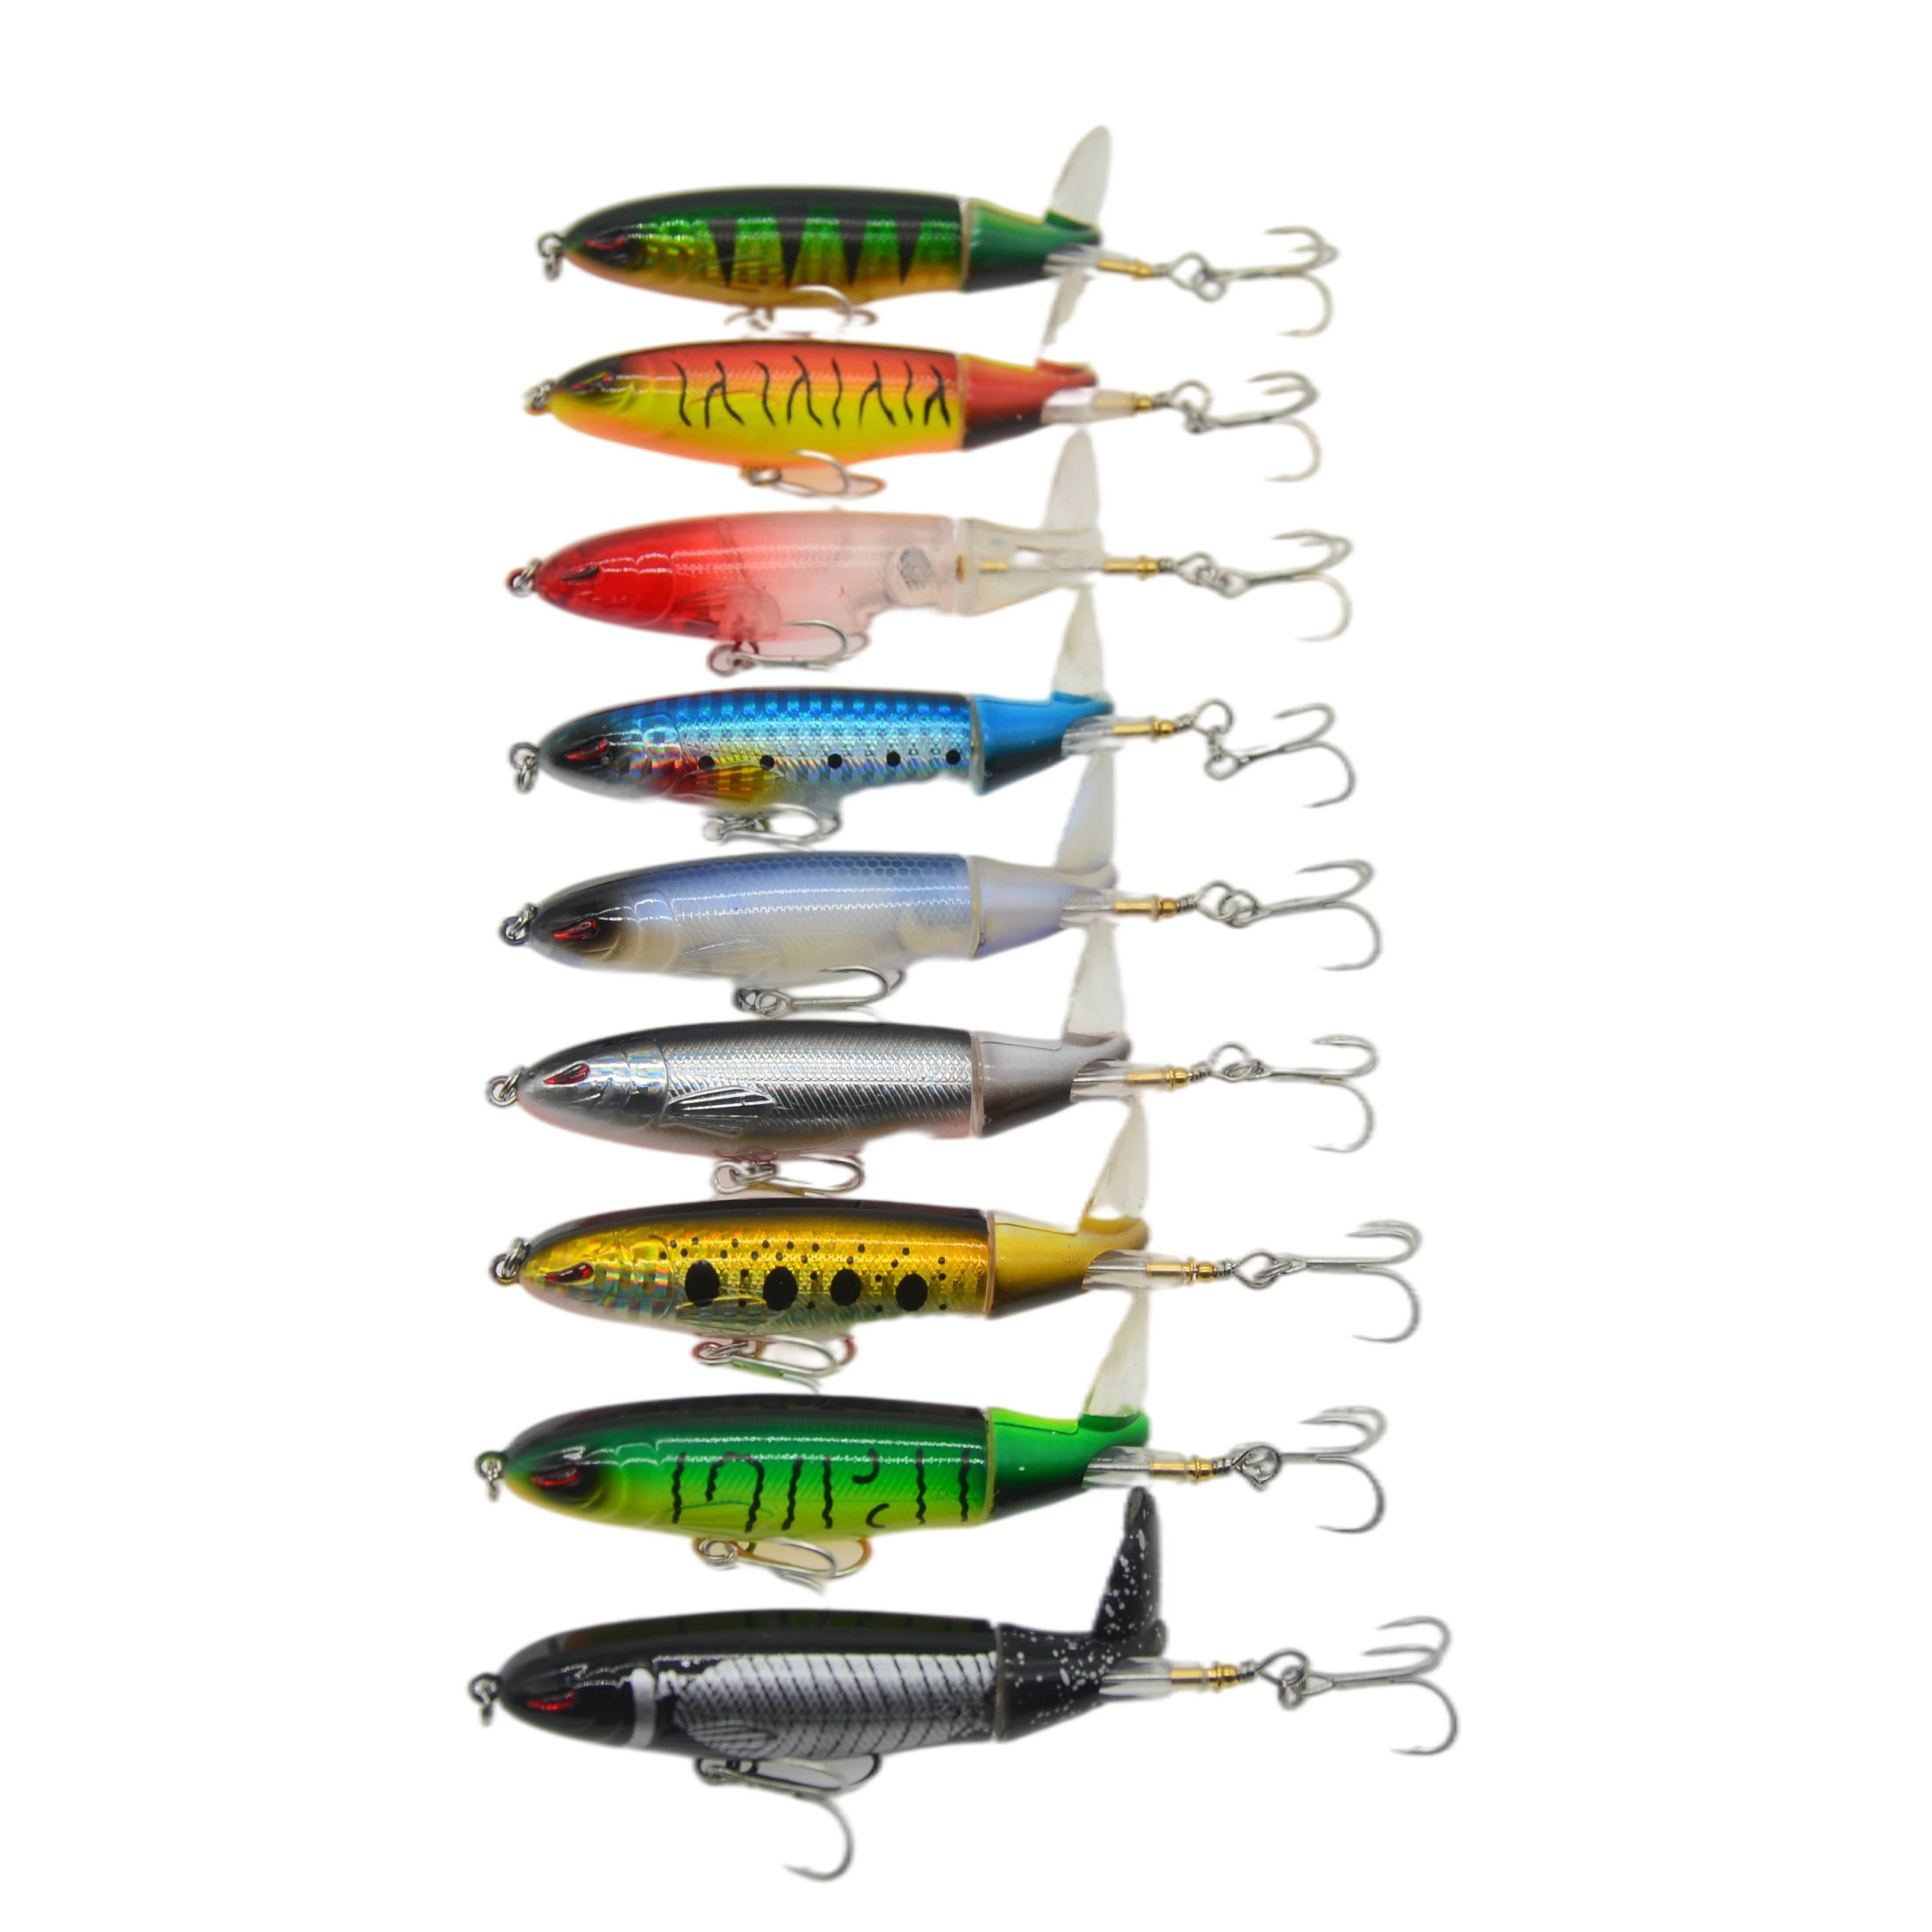 

Top Right 13g 100mm Rpe001 Pesca Artificial Bait Angel Fishing Lure Rotatable Tail Topwater Whopper Popper, As the picture shows